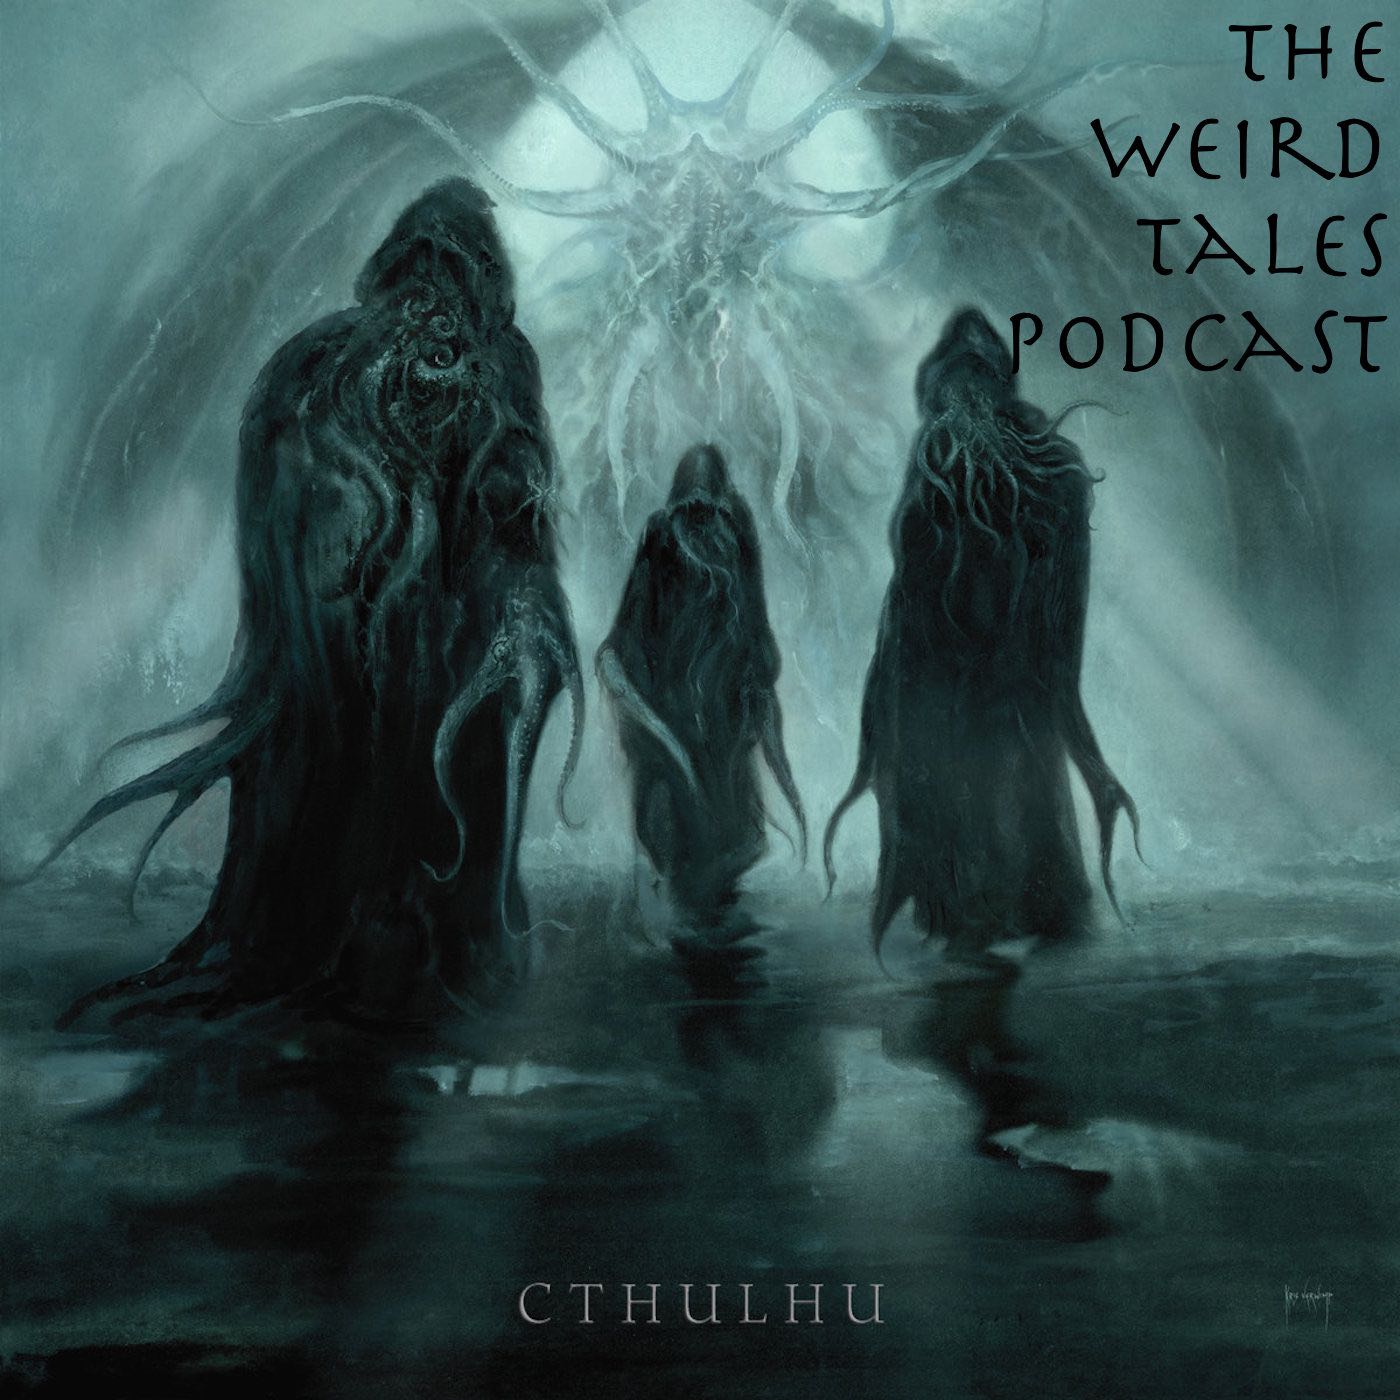 The Call of Cthulhu, Part 2: The Tale of Inspector Lagrasse